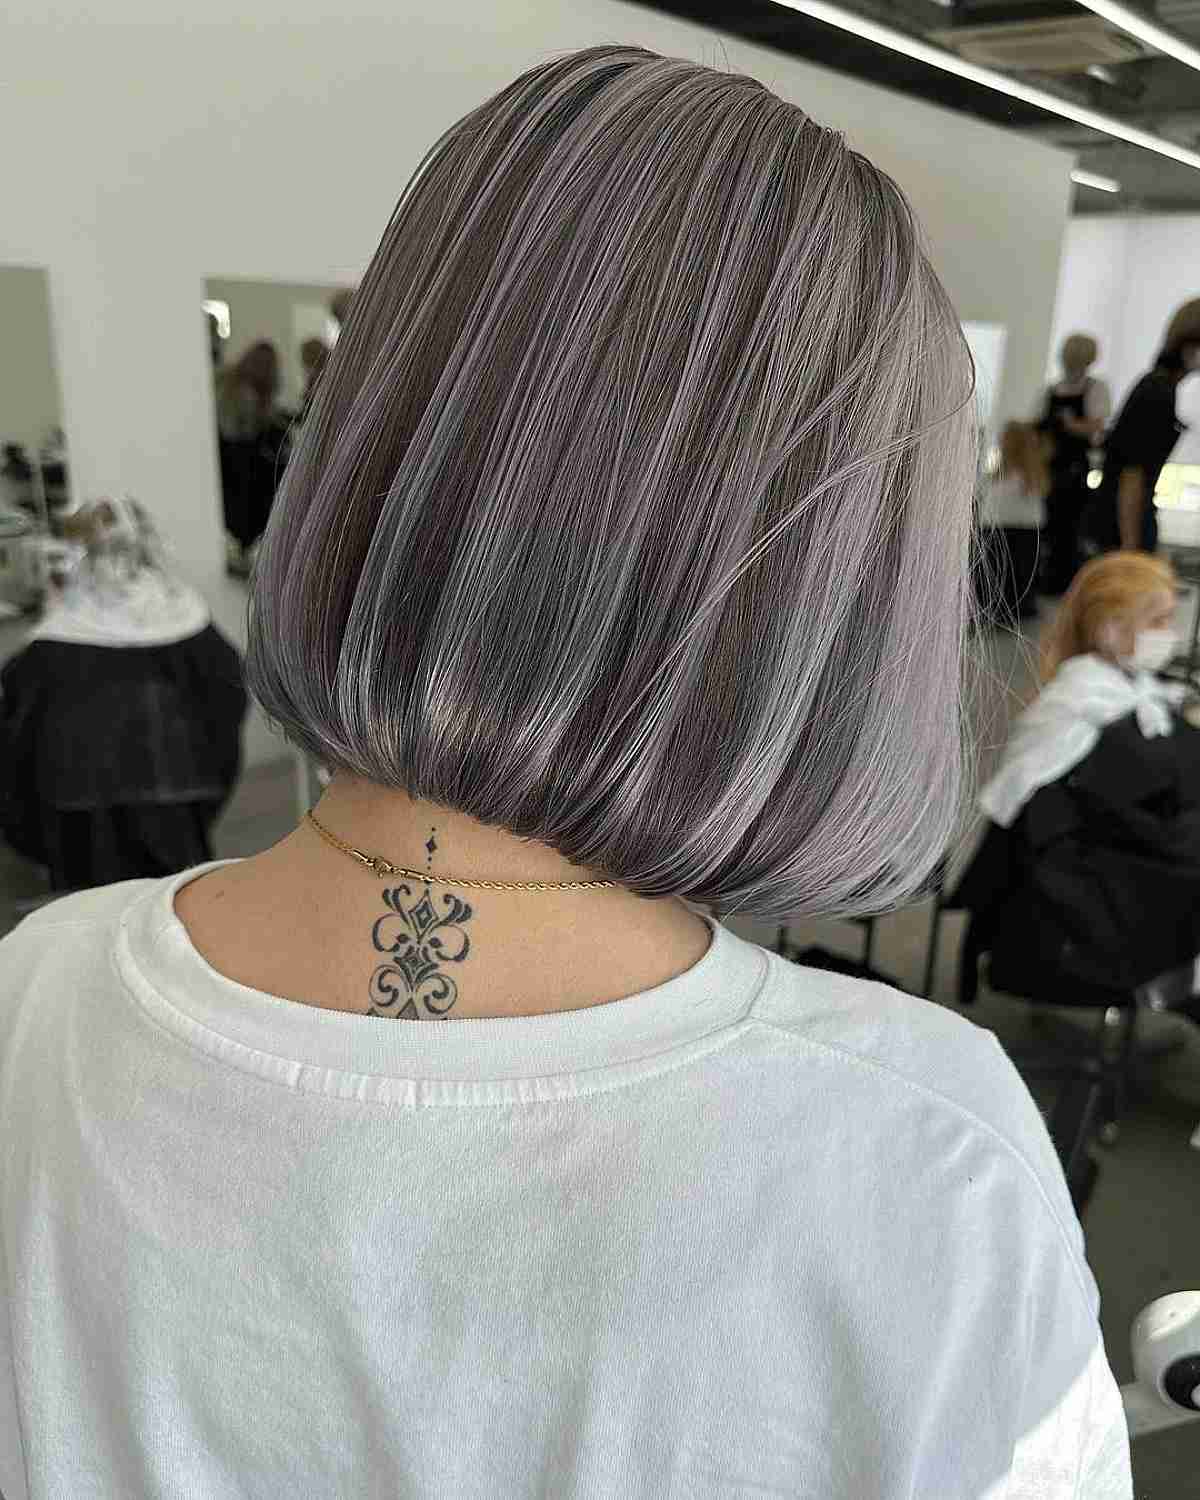 Silvery Gray Hair for Winter